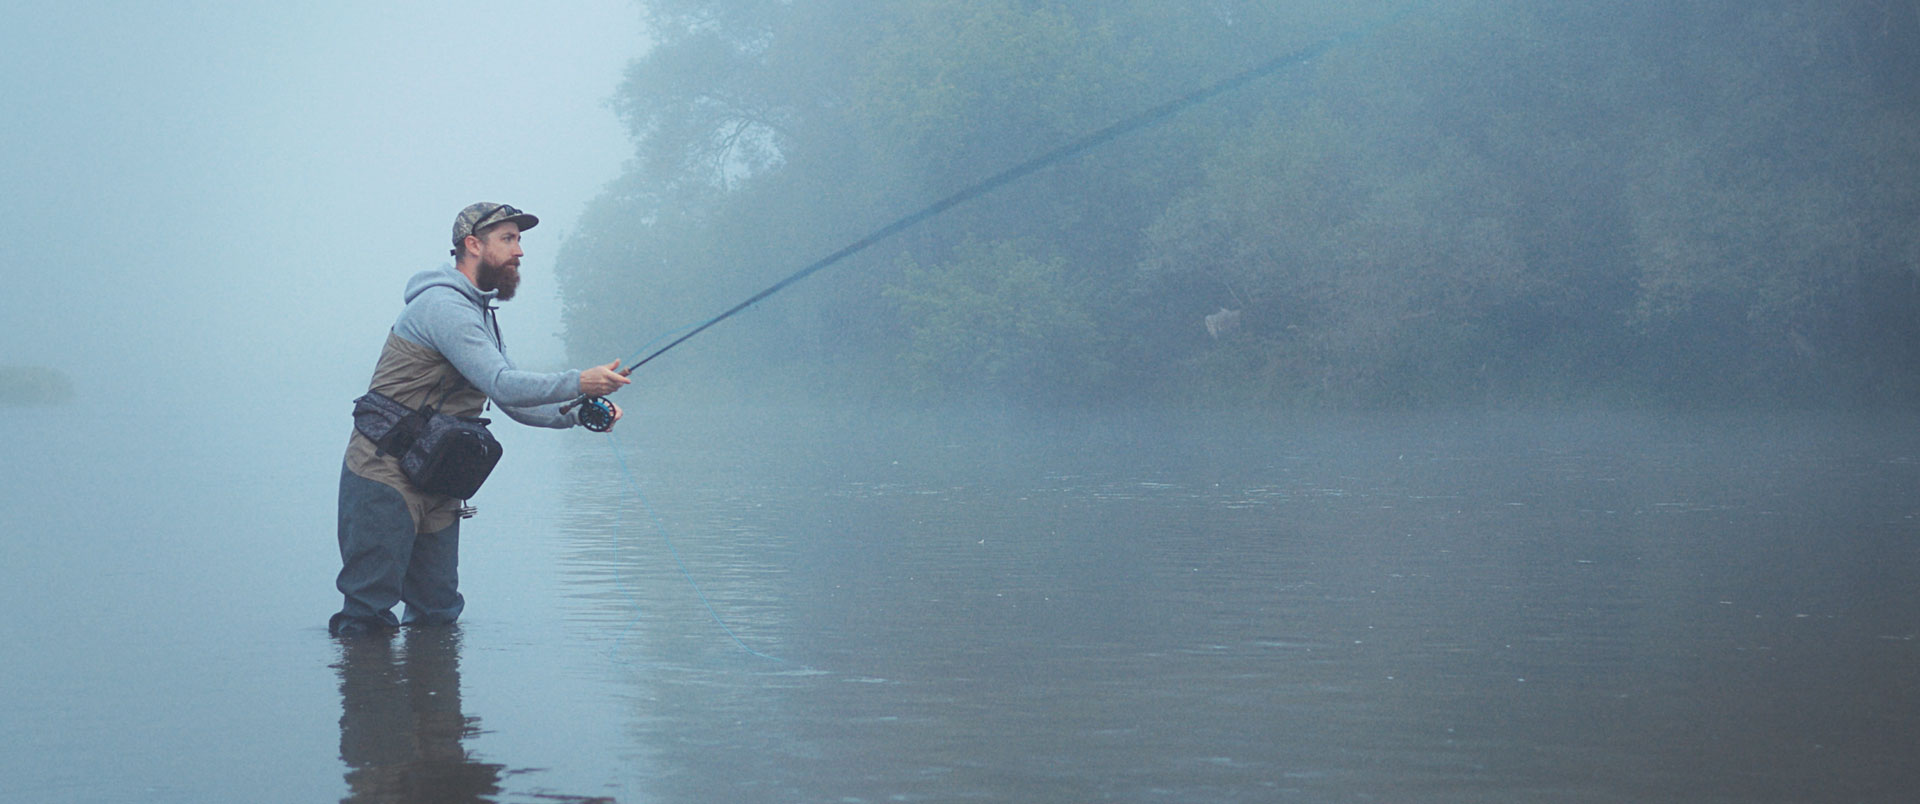 Man standing in lake fishing, in the early morning lake with mist